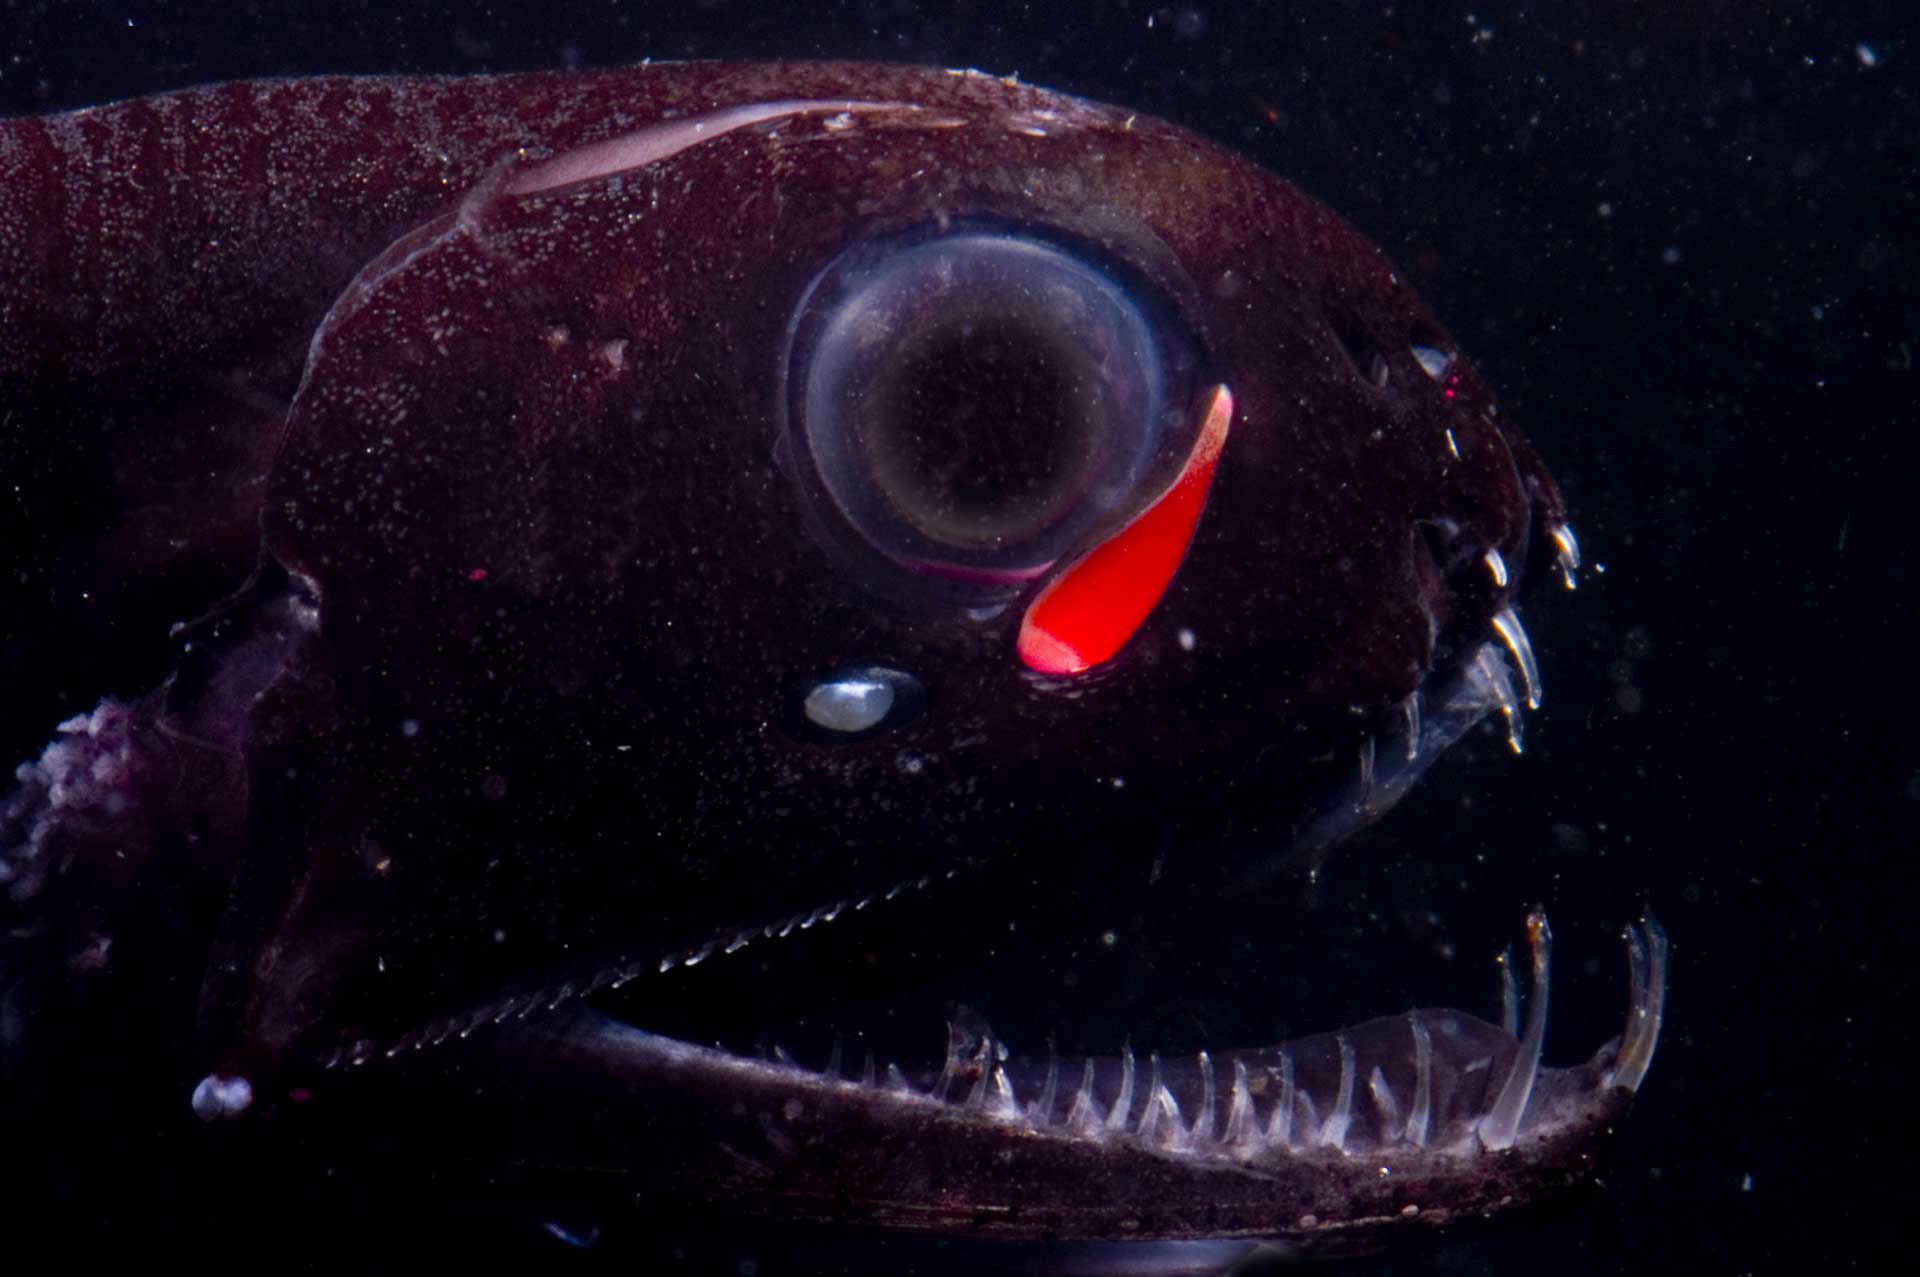 Pachystomias microdon, a dragonfish, living in deep mesopelagic waters.